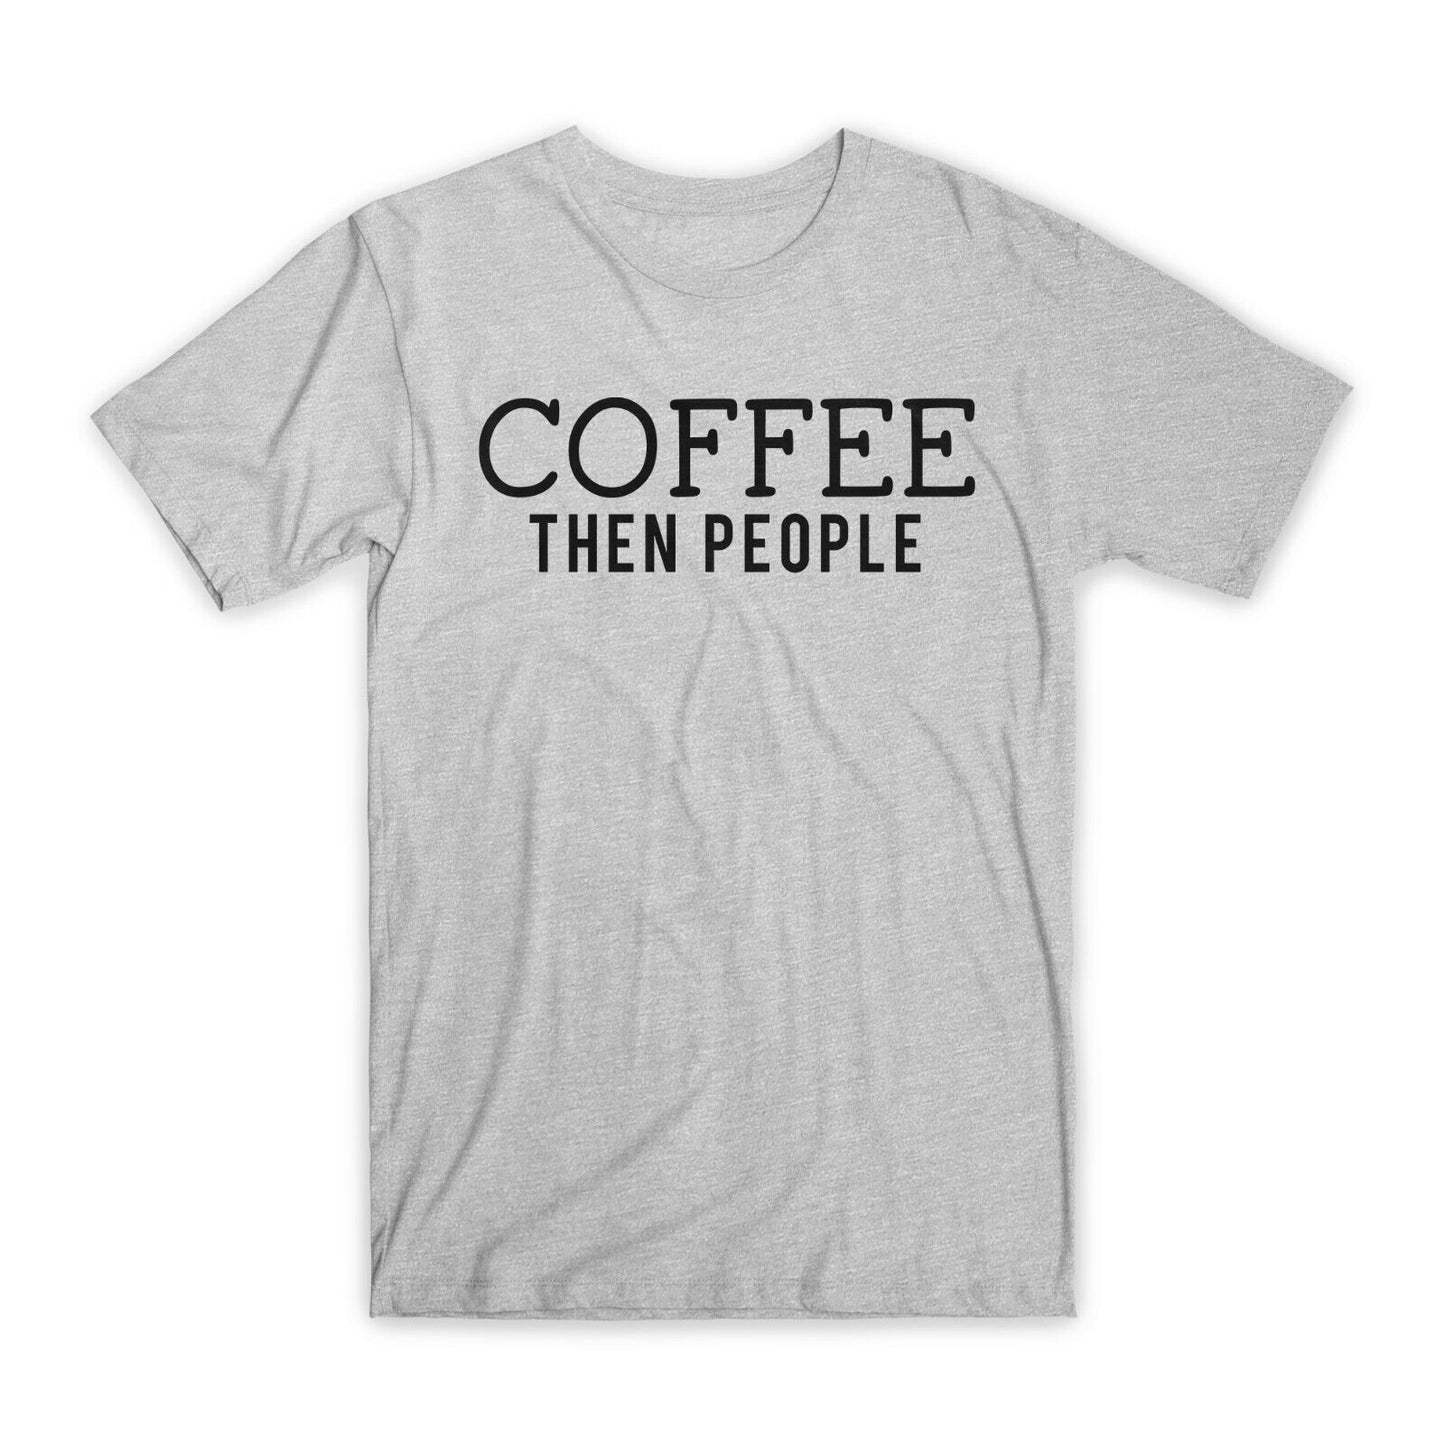 Coffee Then People T-Shirt Premium Soft Cotton Crew Neck Funny Tees Gifts NEW